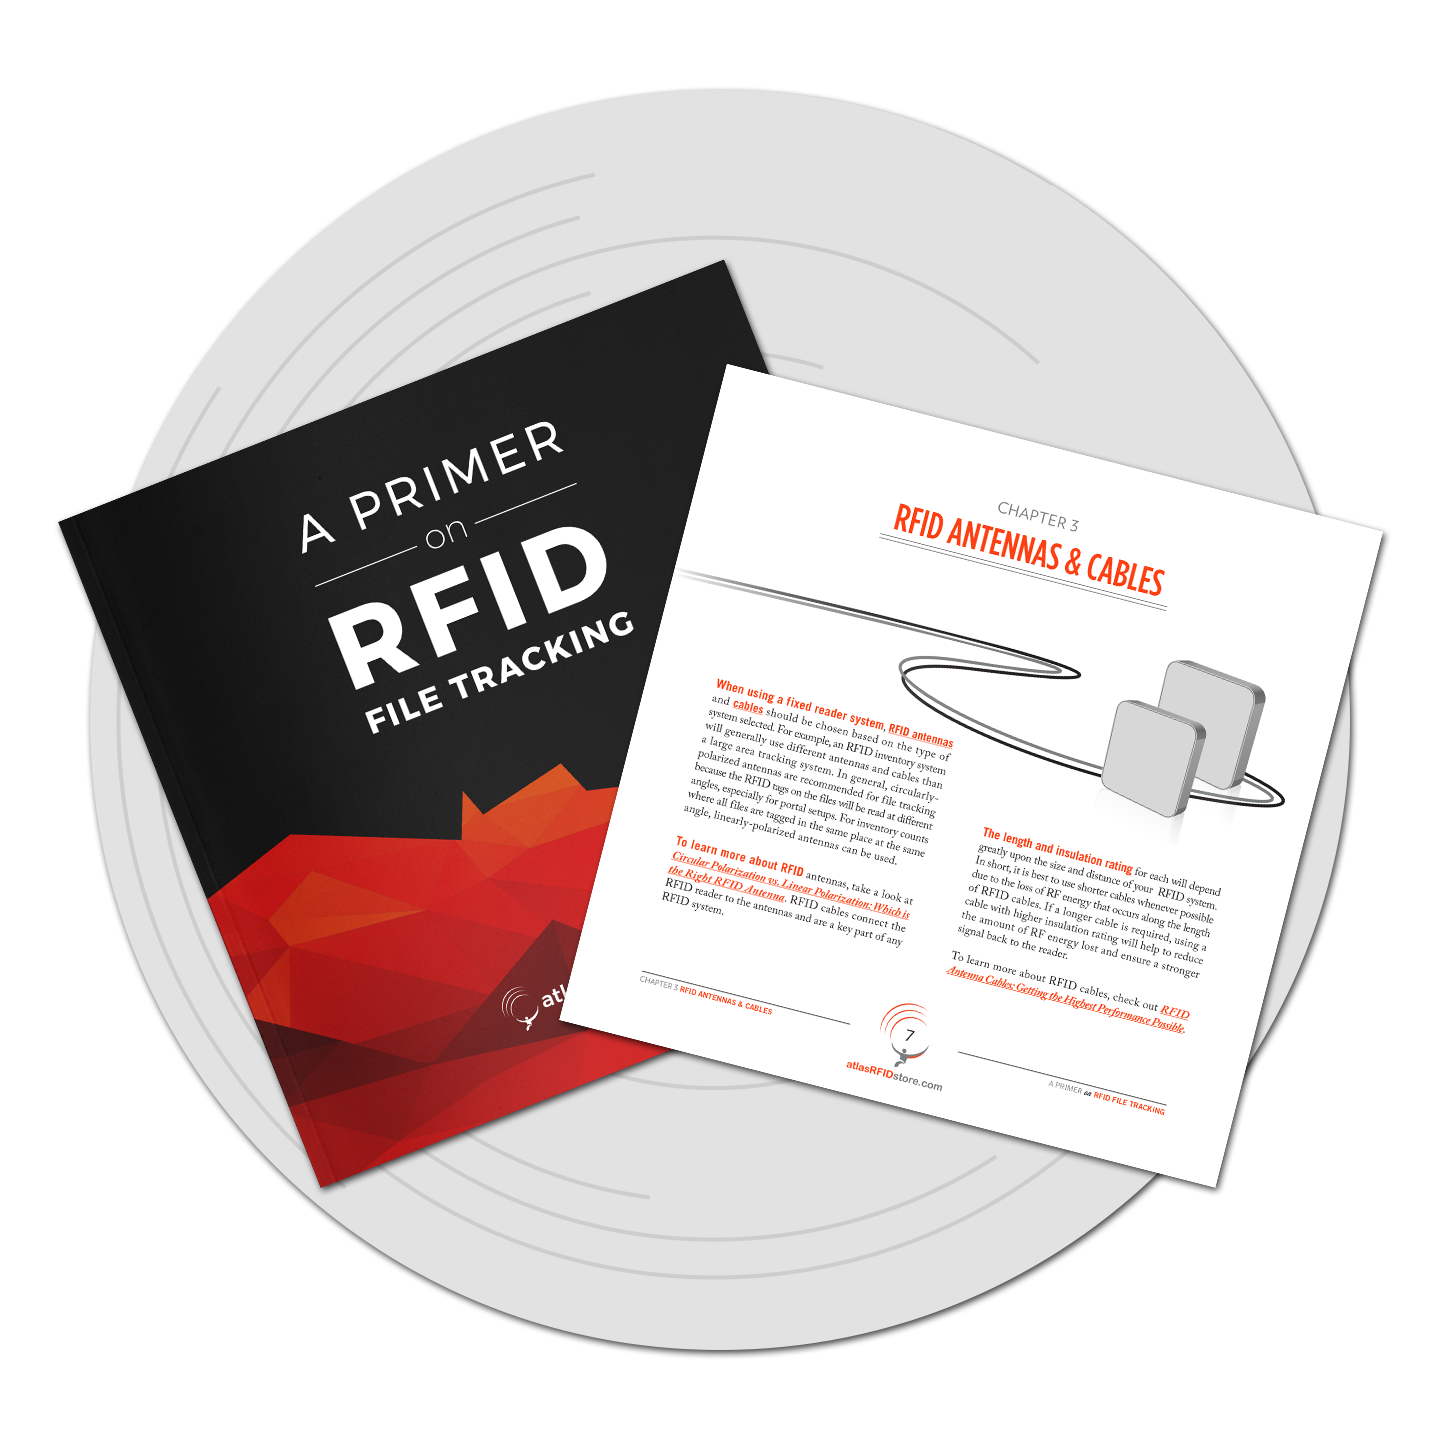 A Primer on RFID File Tracking